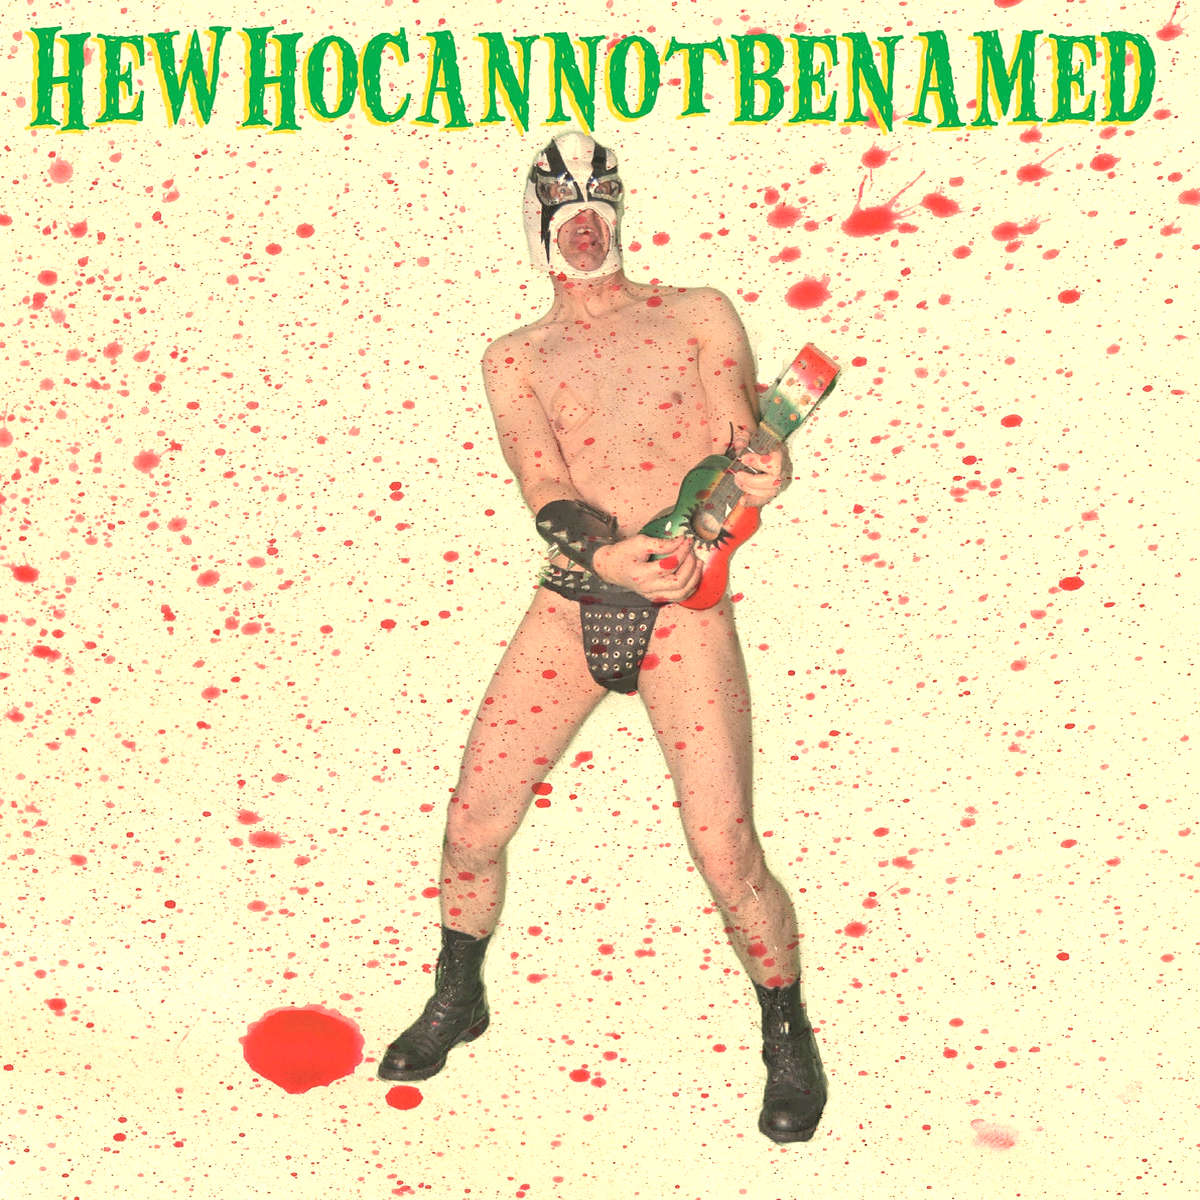 He Who Cannot Be Named- S/T 7" ~EX DWARVES / LTD TO 200 NUMBERED COPIES!